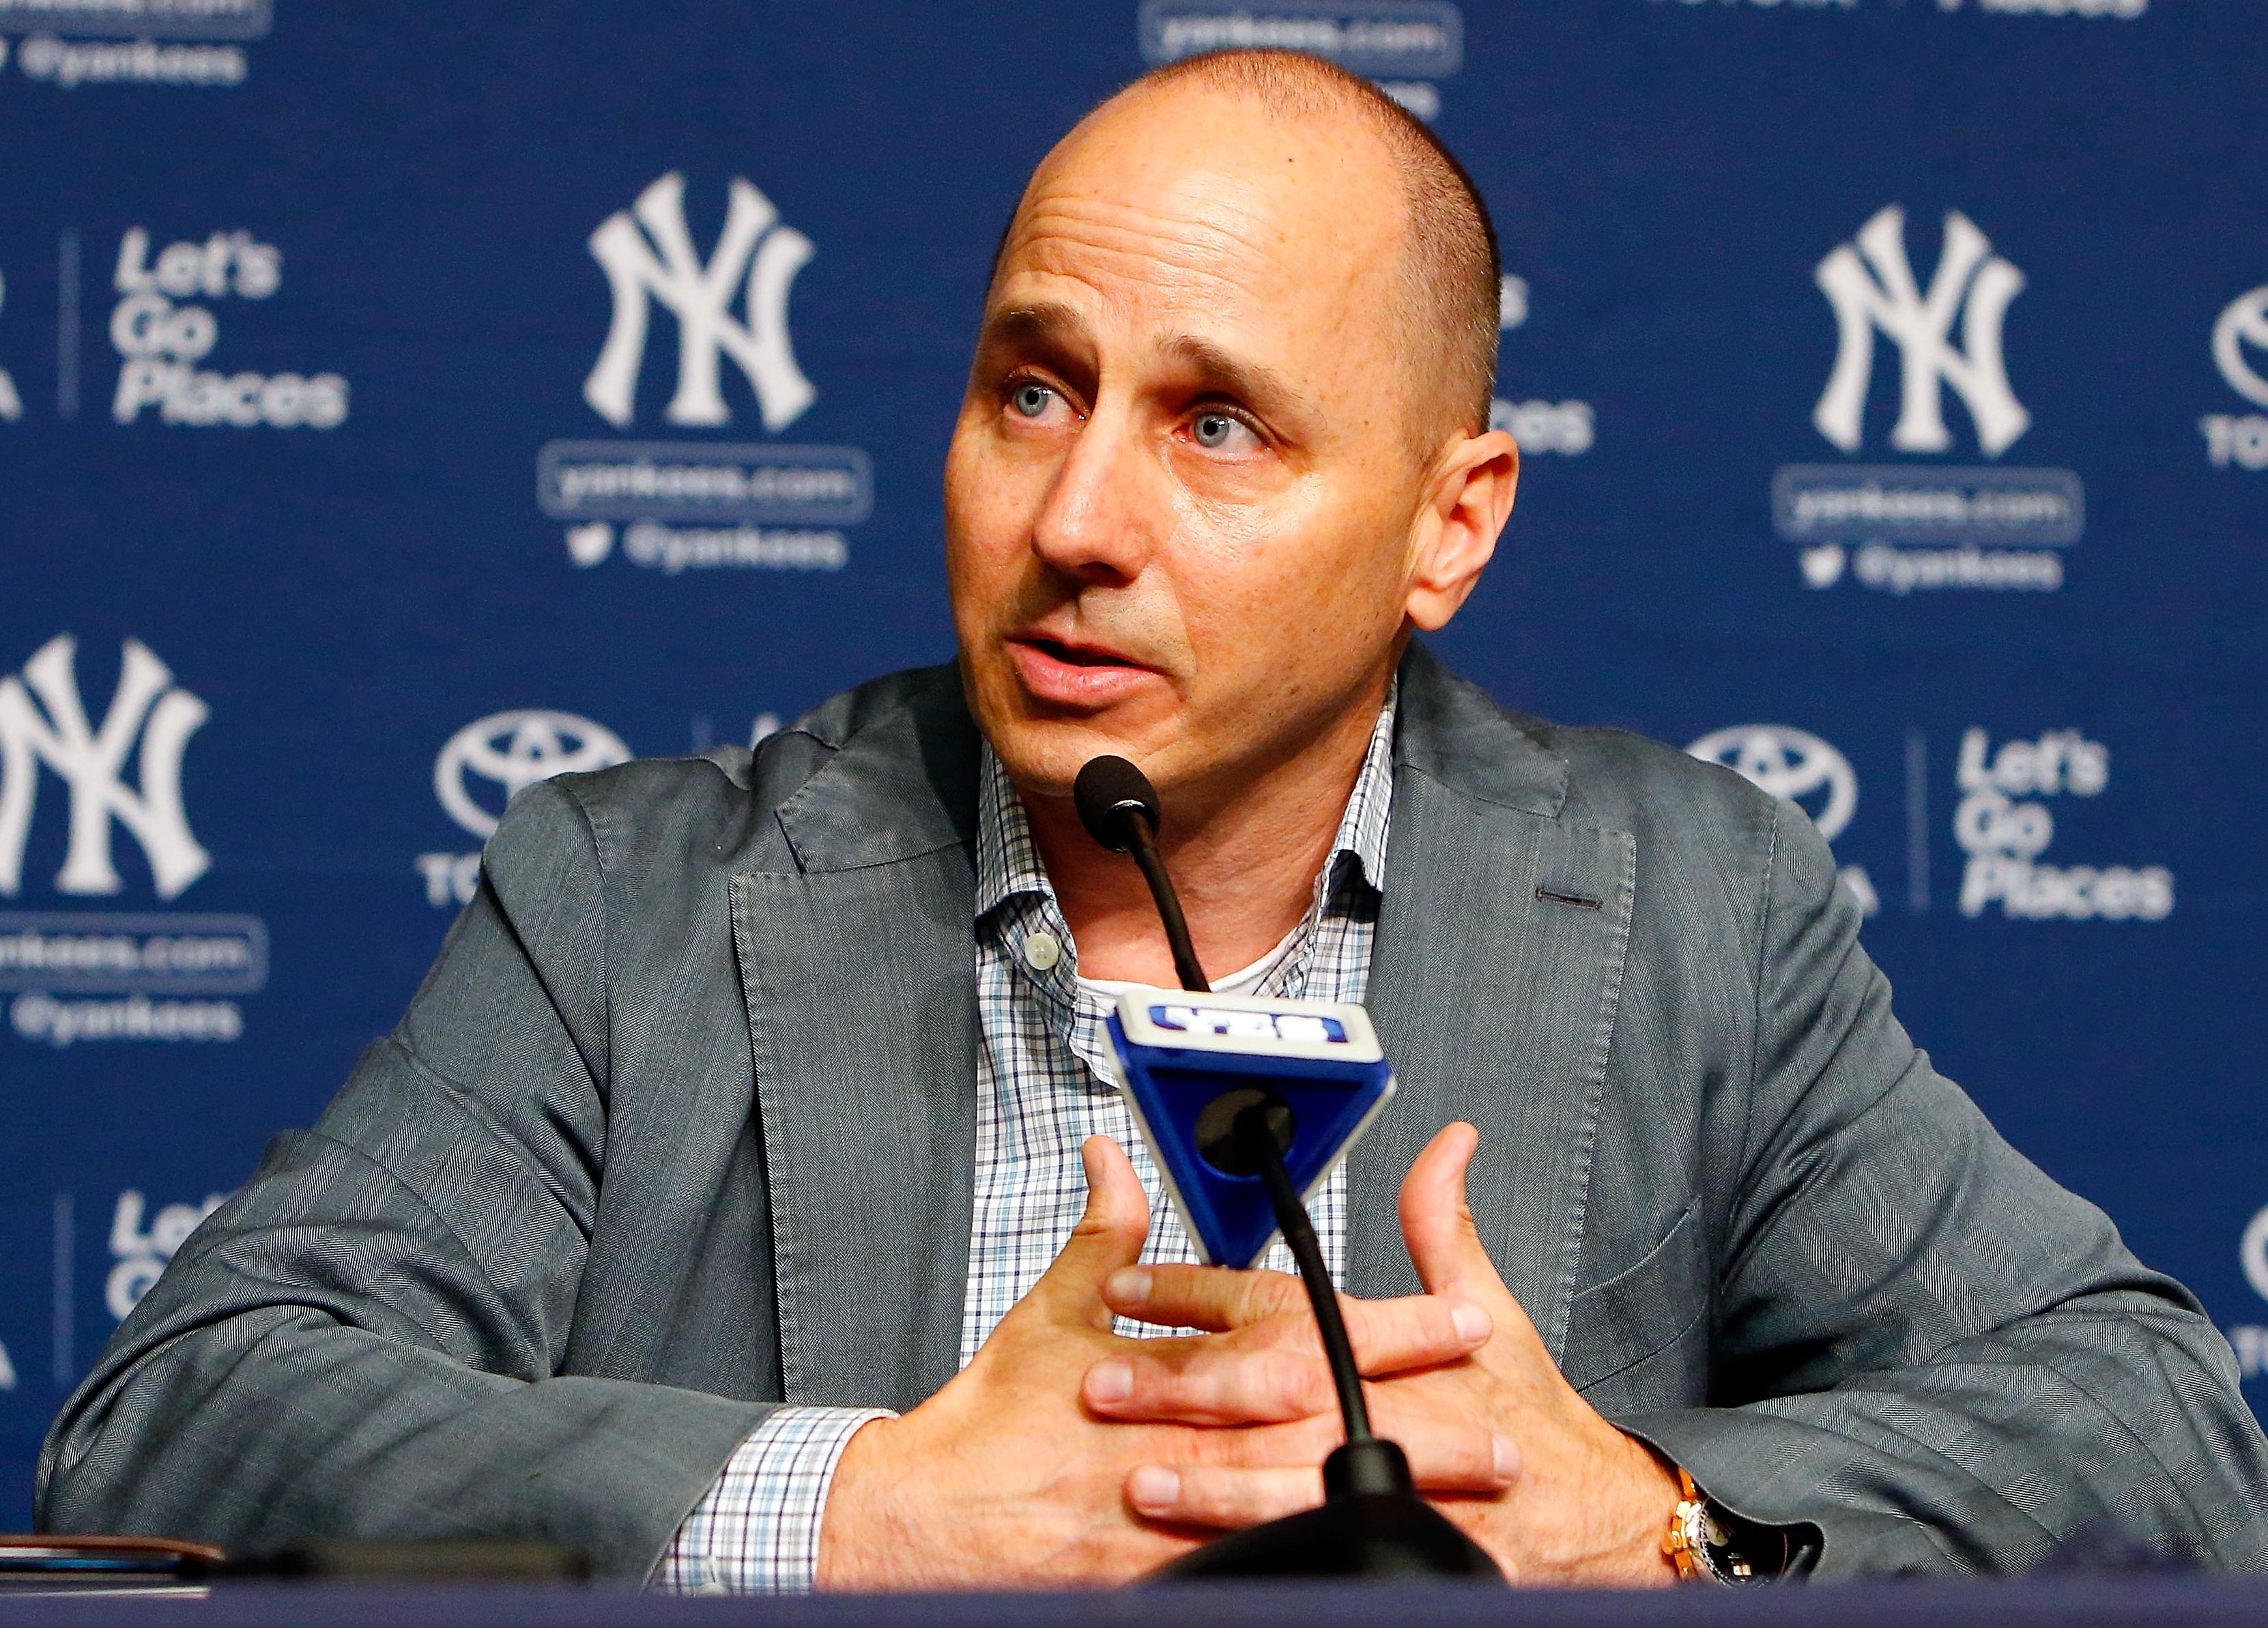 New York Yankees general manager Brian Cashman speaks during a news conference on August 7, 2016 at Yankee Stadium in the Bronx borough of New York City.  (Photo by Jim McIsaac/Getty Images)